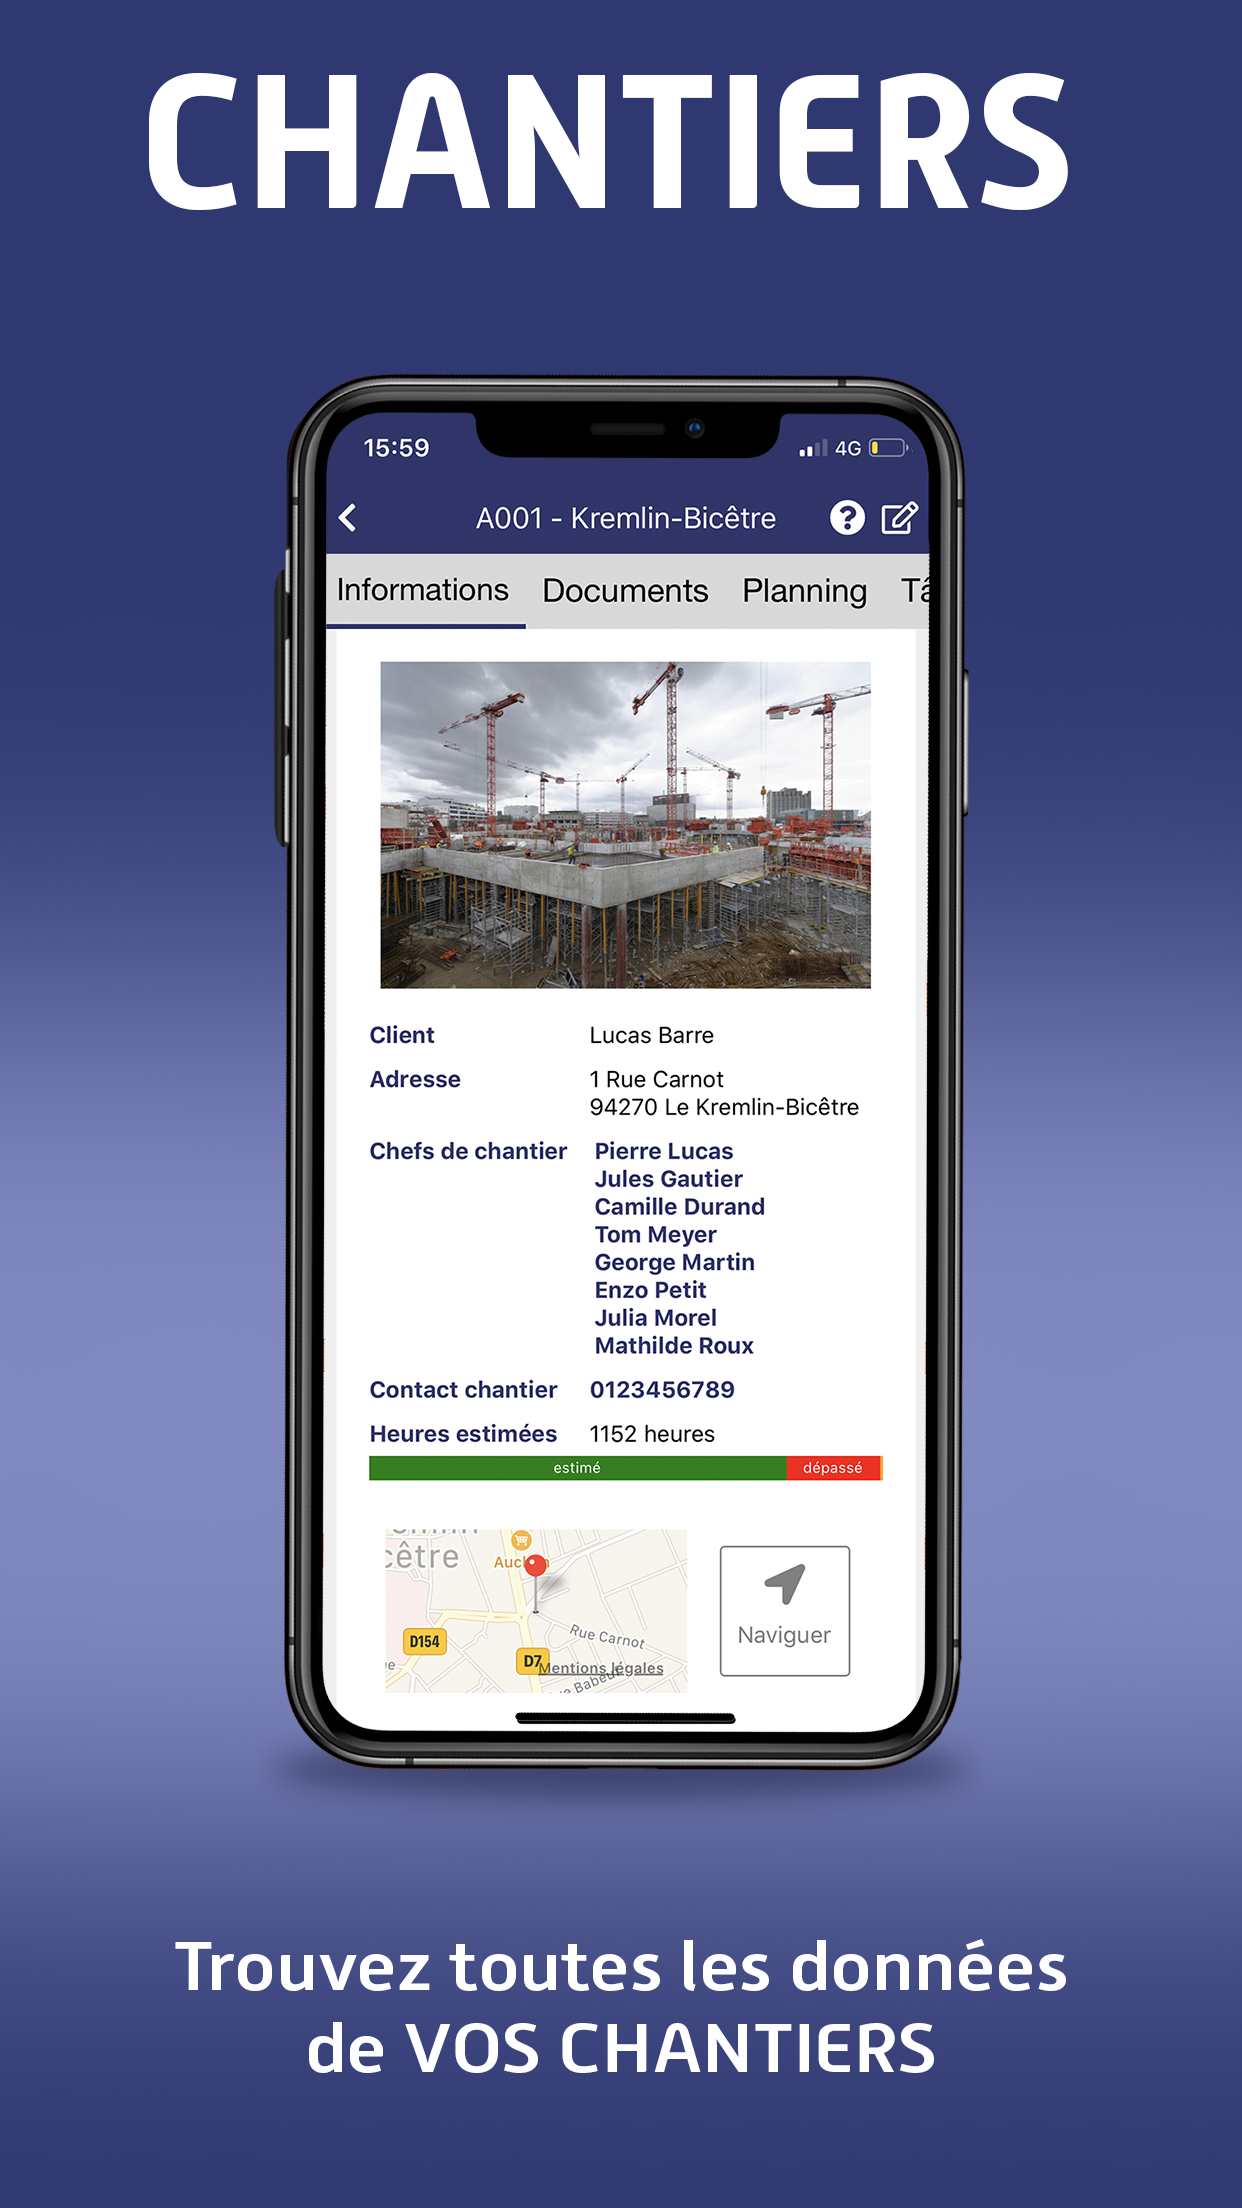 Alobees Software - Follow the progress of your work sites in real time thanks to the news feed. Your collaborators share photos and videos to transmit information directly on the field. Take advantage of a storage space to centralize your documents.